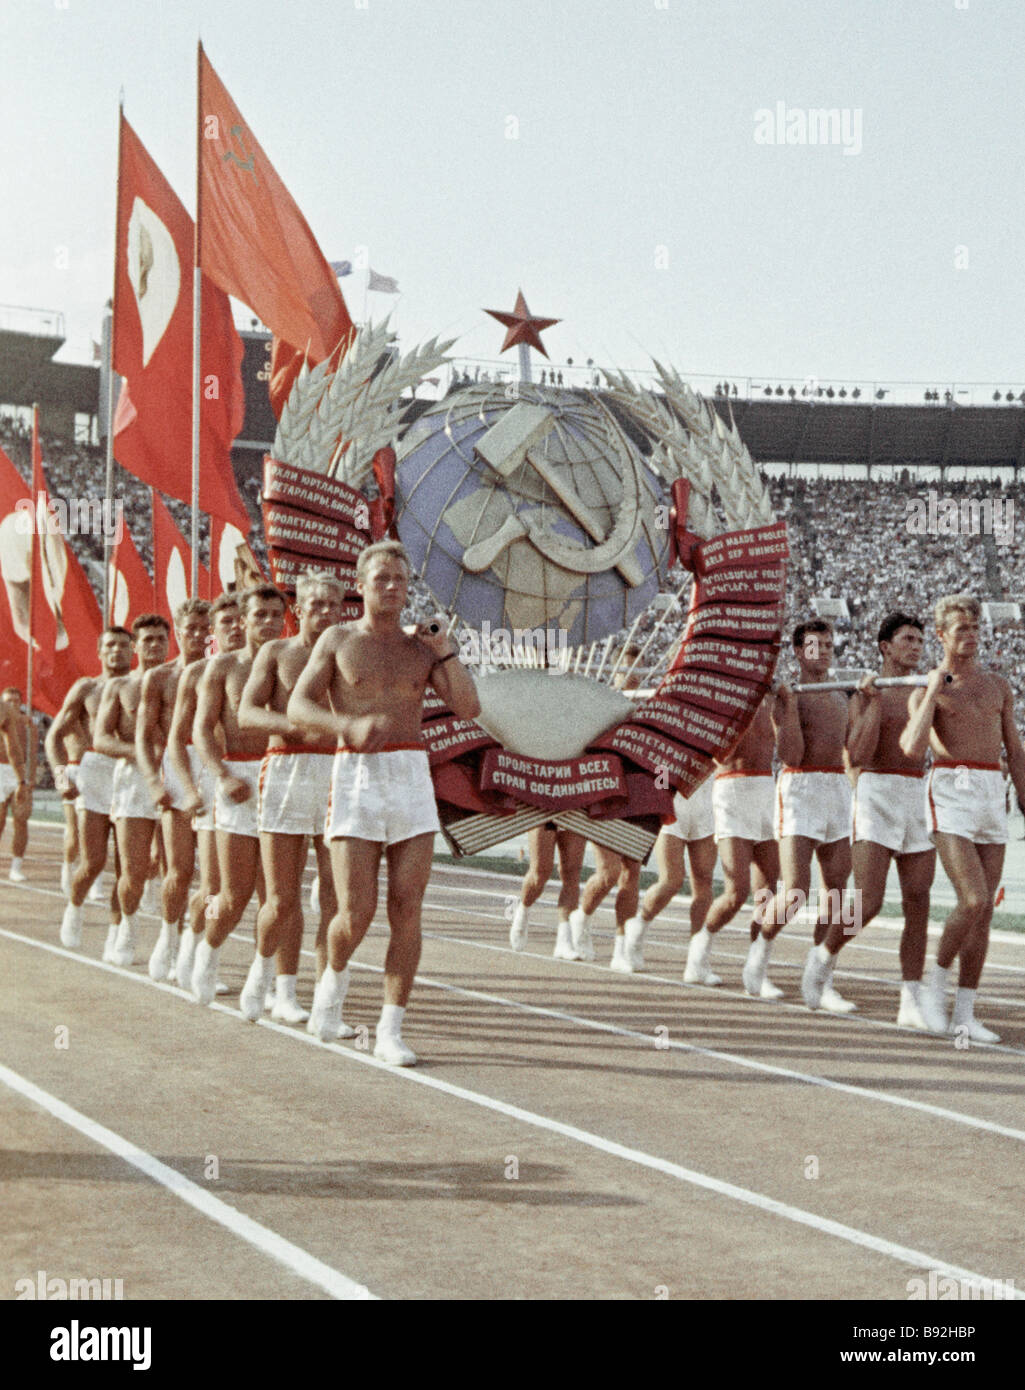 [Image: participants-in-the-sports-parade-carryi...B92HBP.jpg]